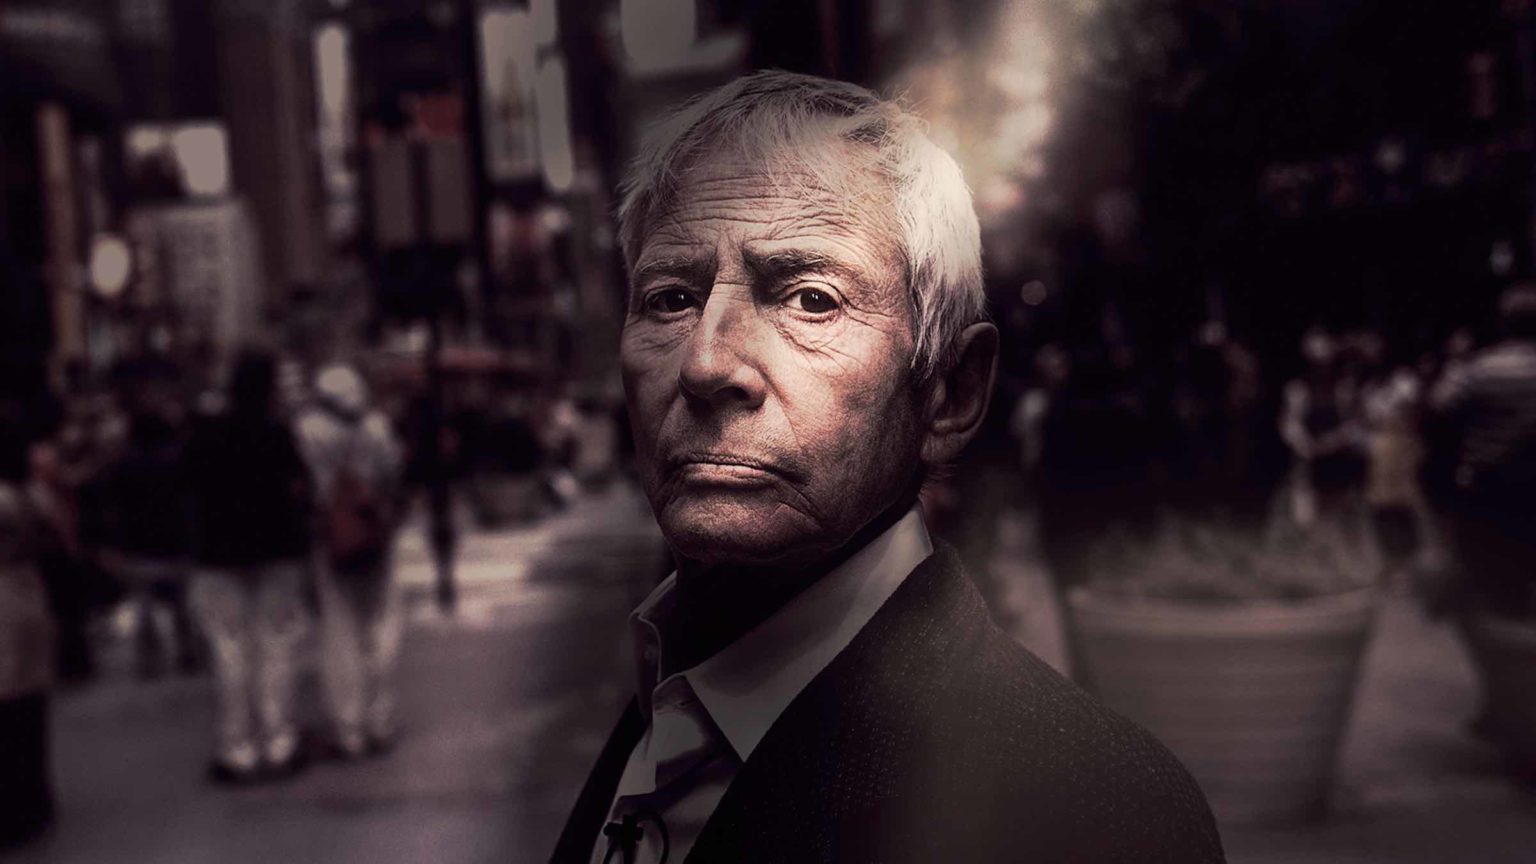 Prior to the HBO documentary, 'The Jinx' releasing in 2015, justice and Robert Durst had hit an impasse. Here's why you should pay attention.